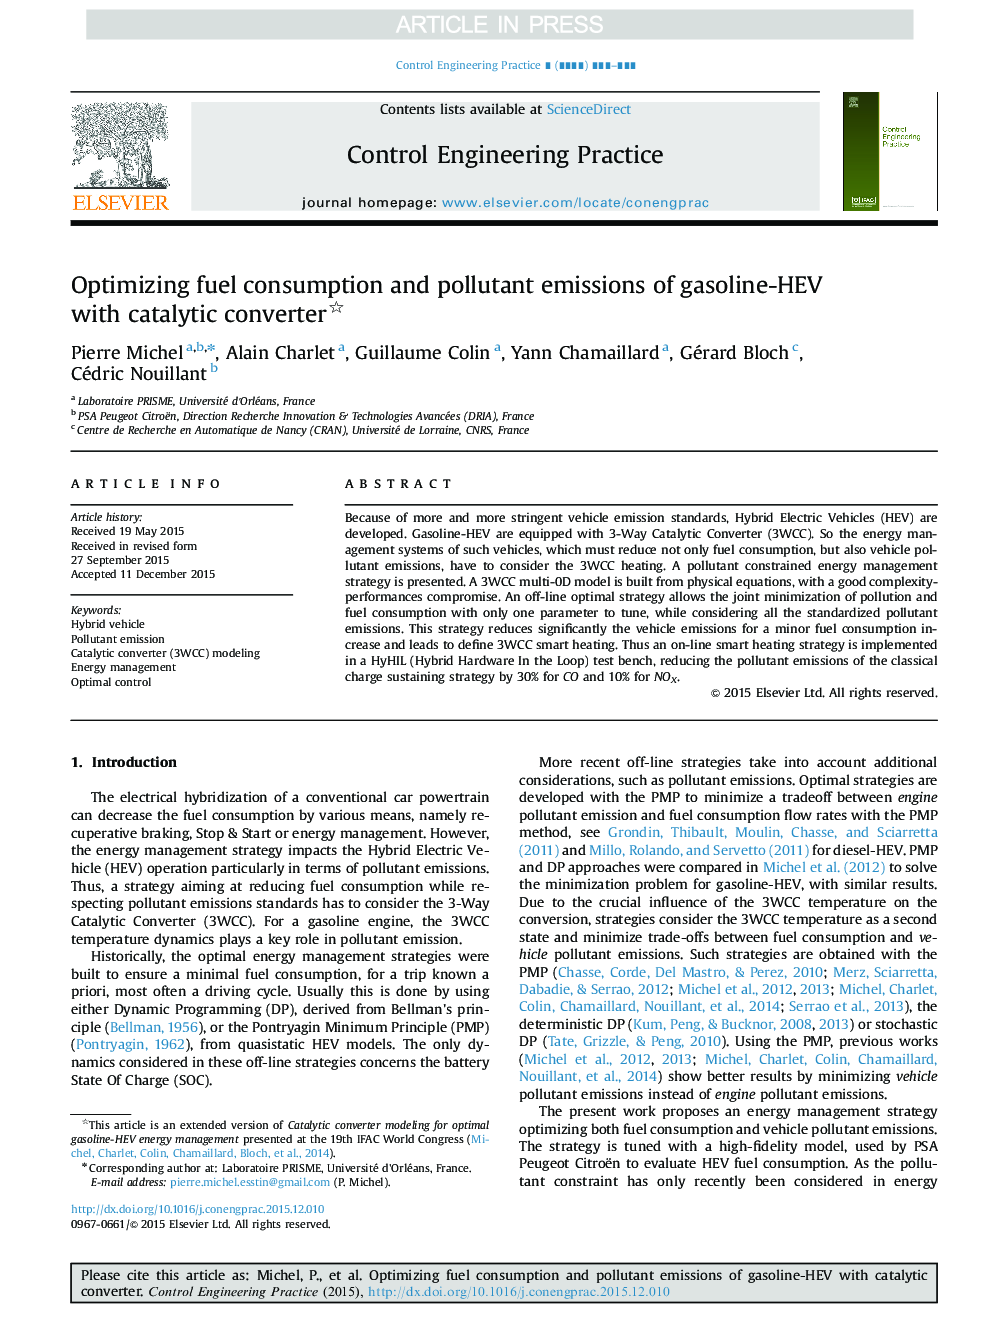 Optimizing fuel consumption and pollutant emissions of gasoline-HEV with catalytic converter